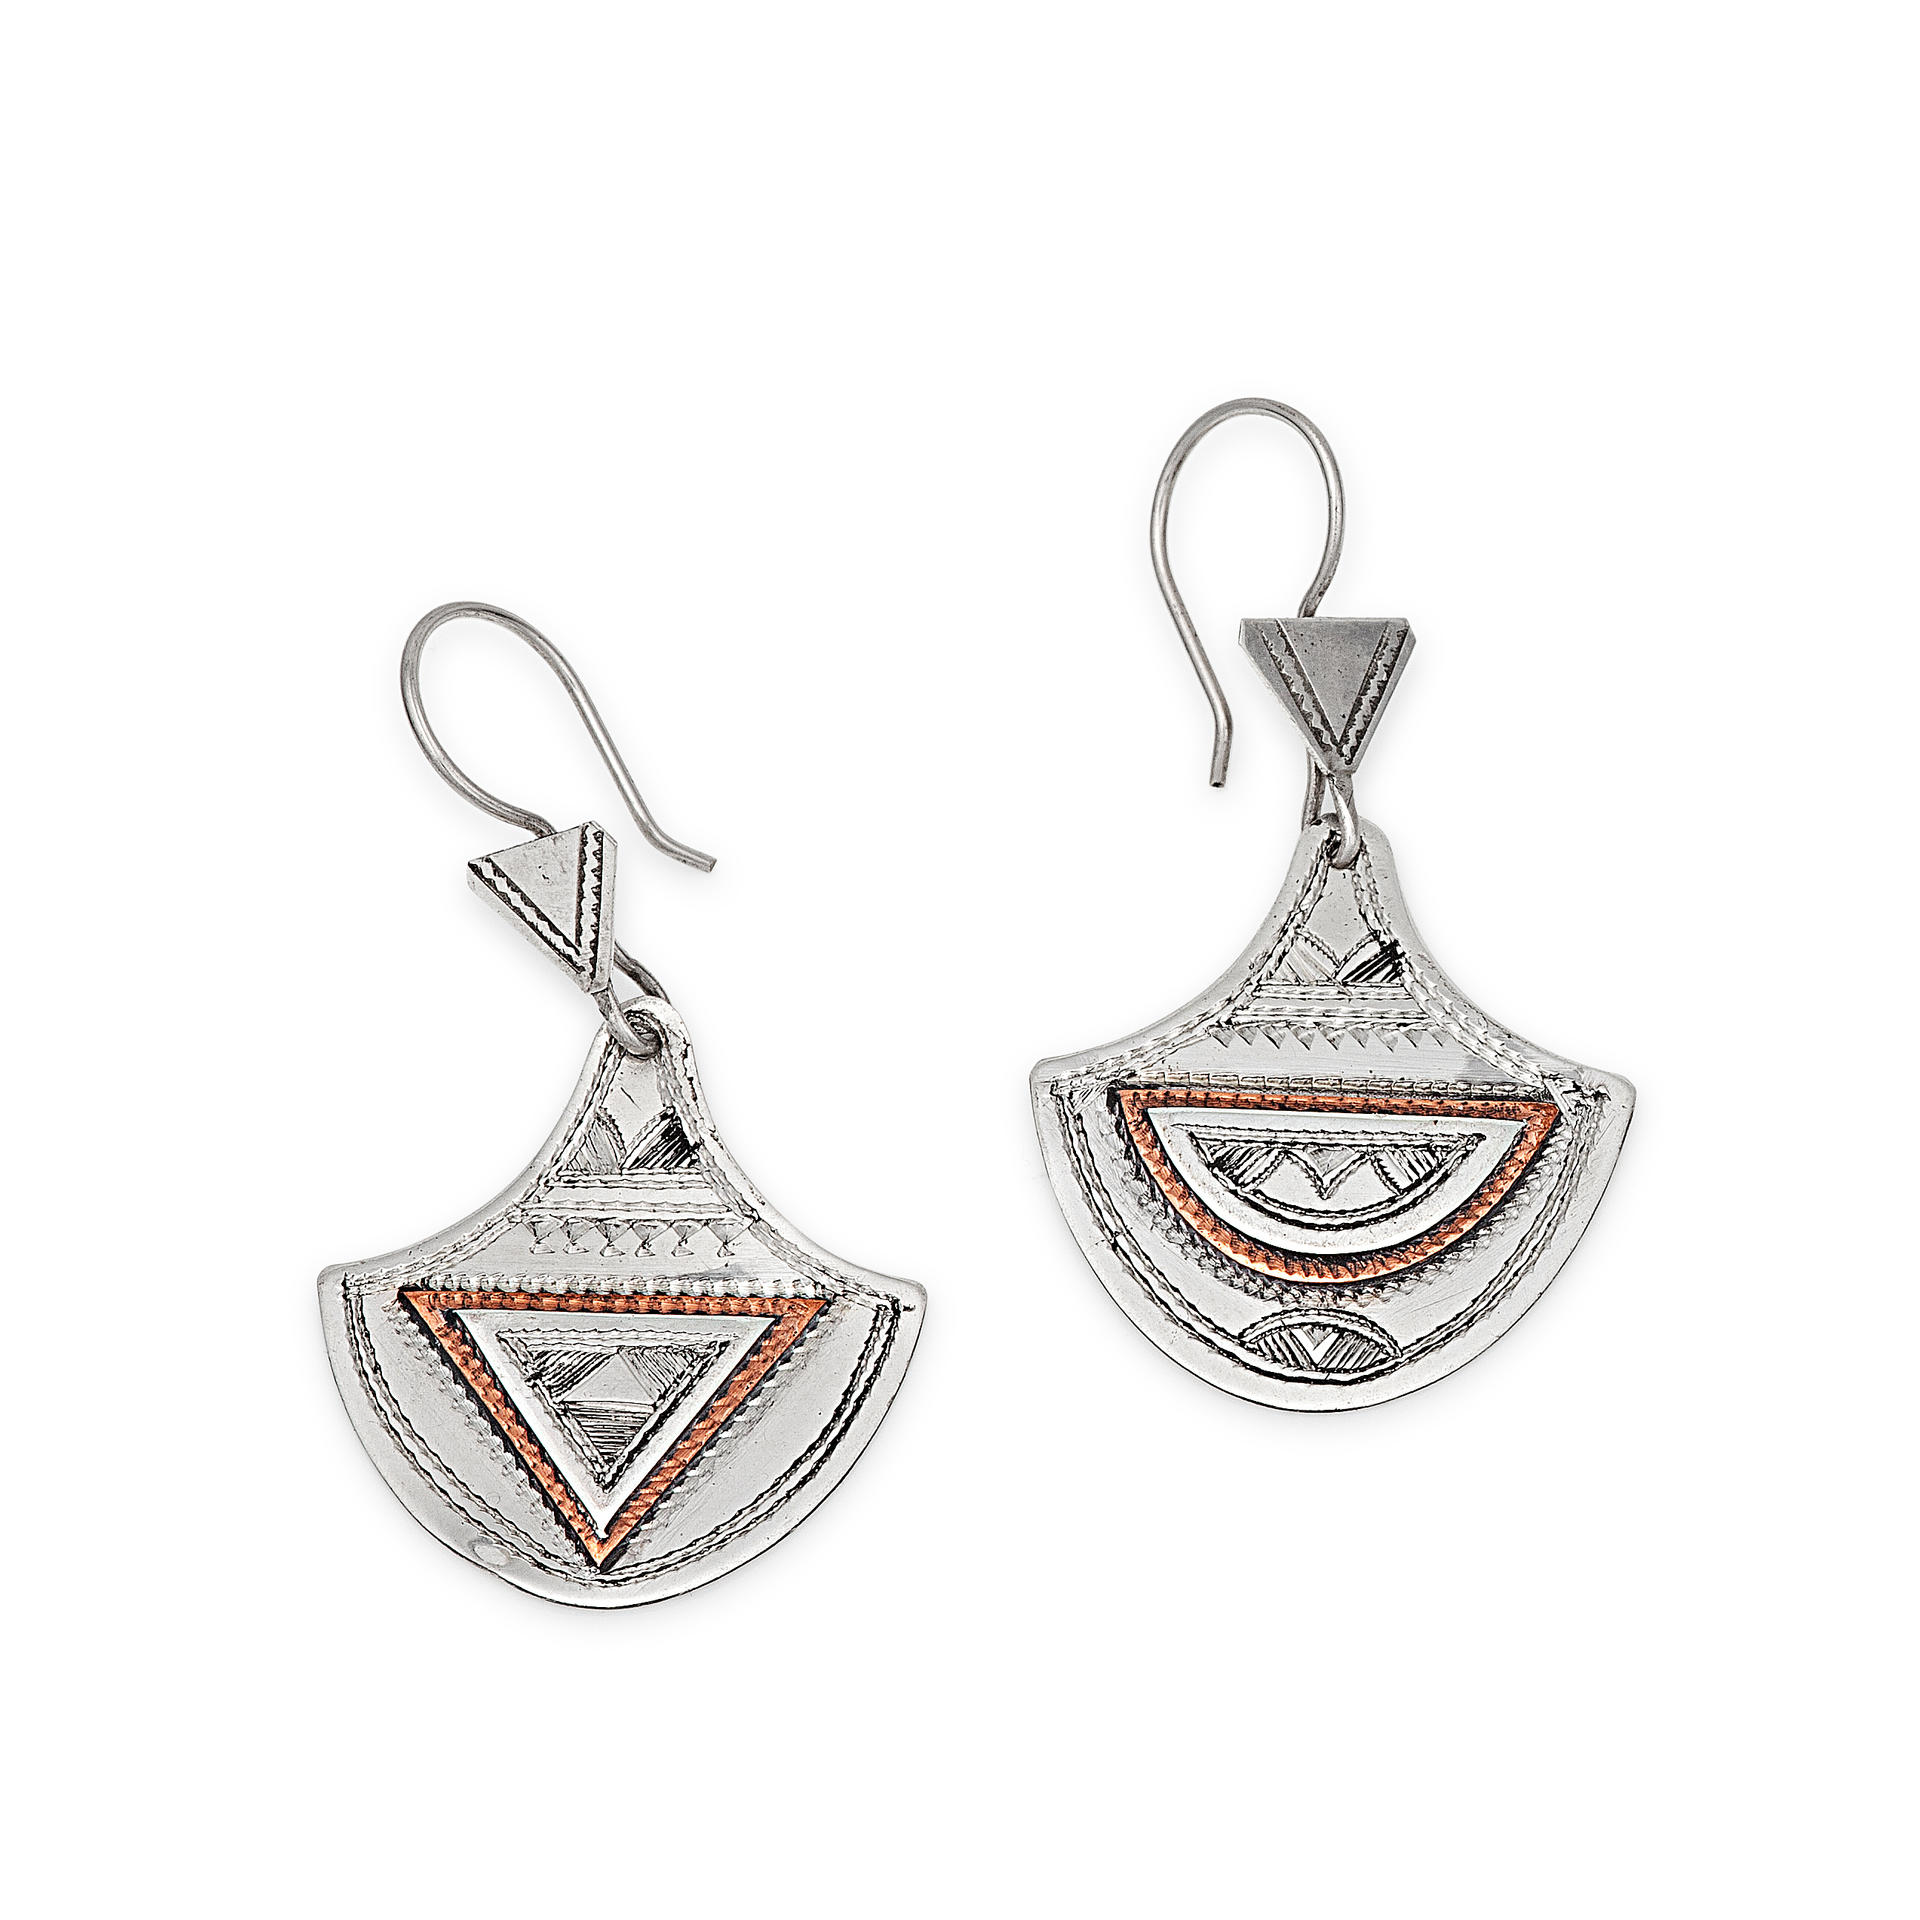 nice silver and copper earrings from Niger